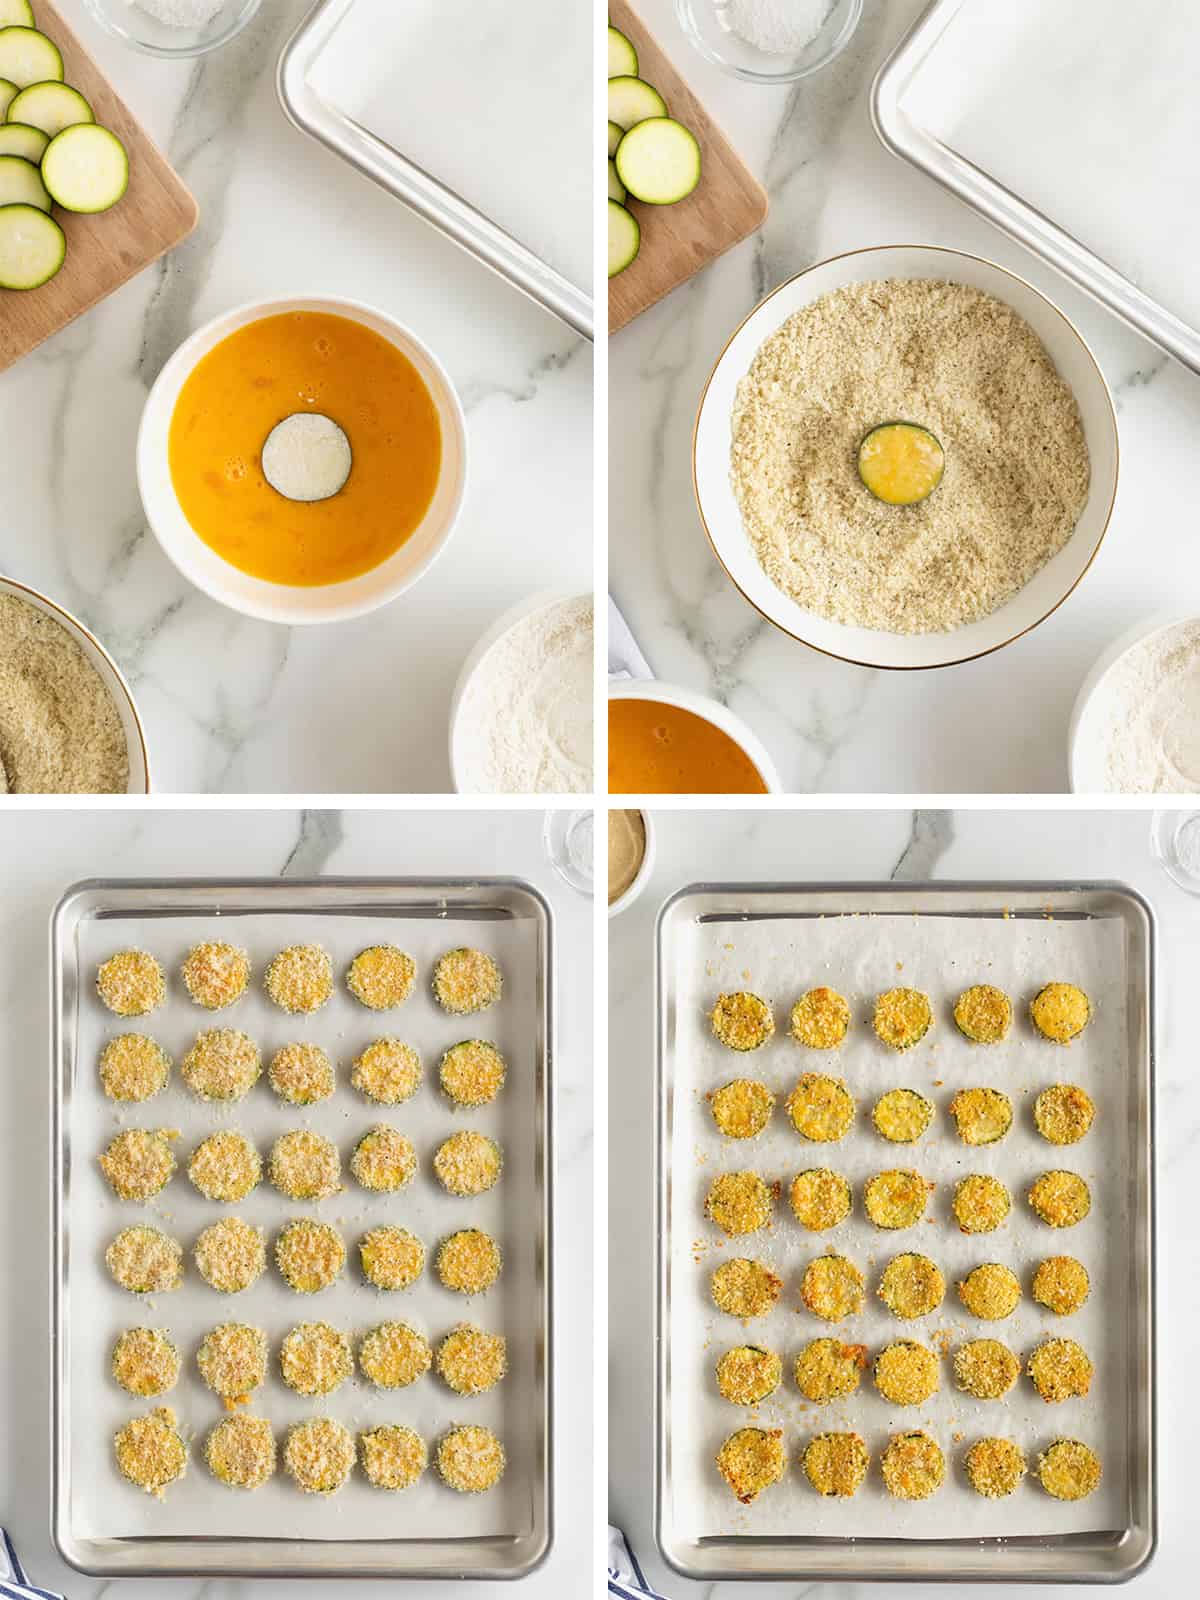 Steps to make baked zucchini chips.